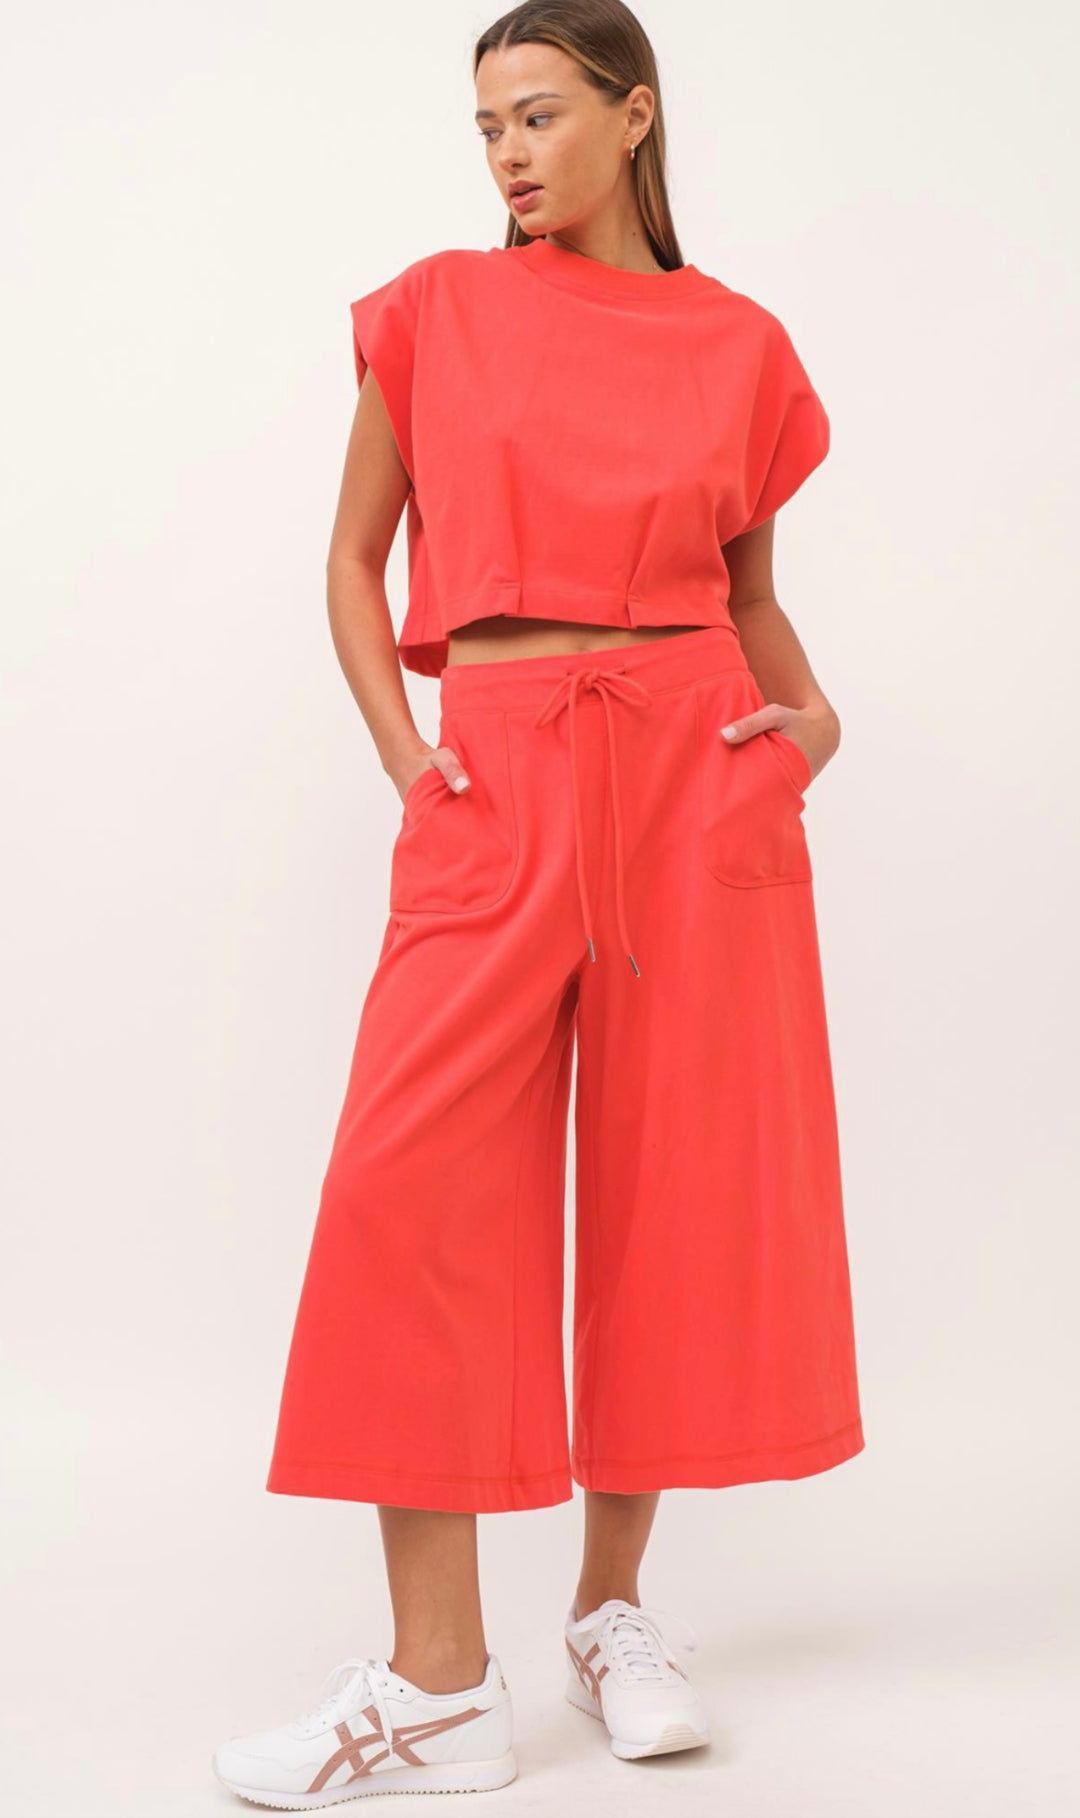 Waist Crop button up the back Top Hot Coral